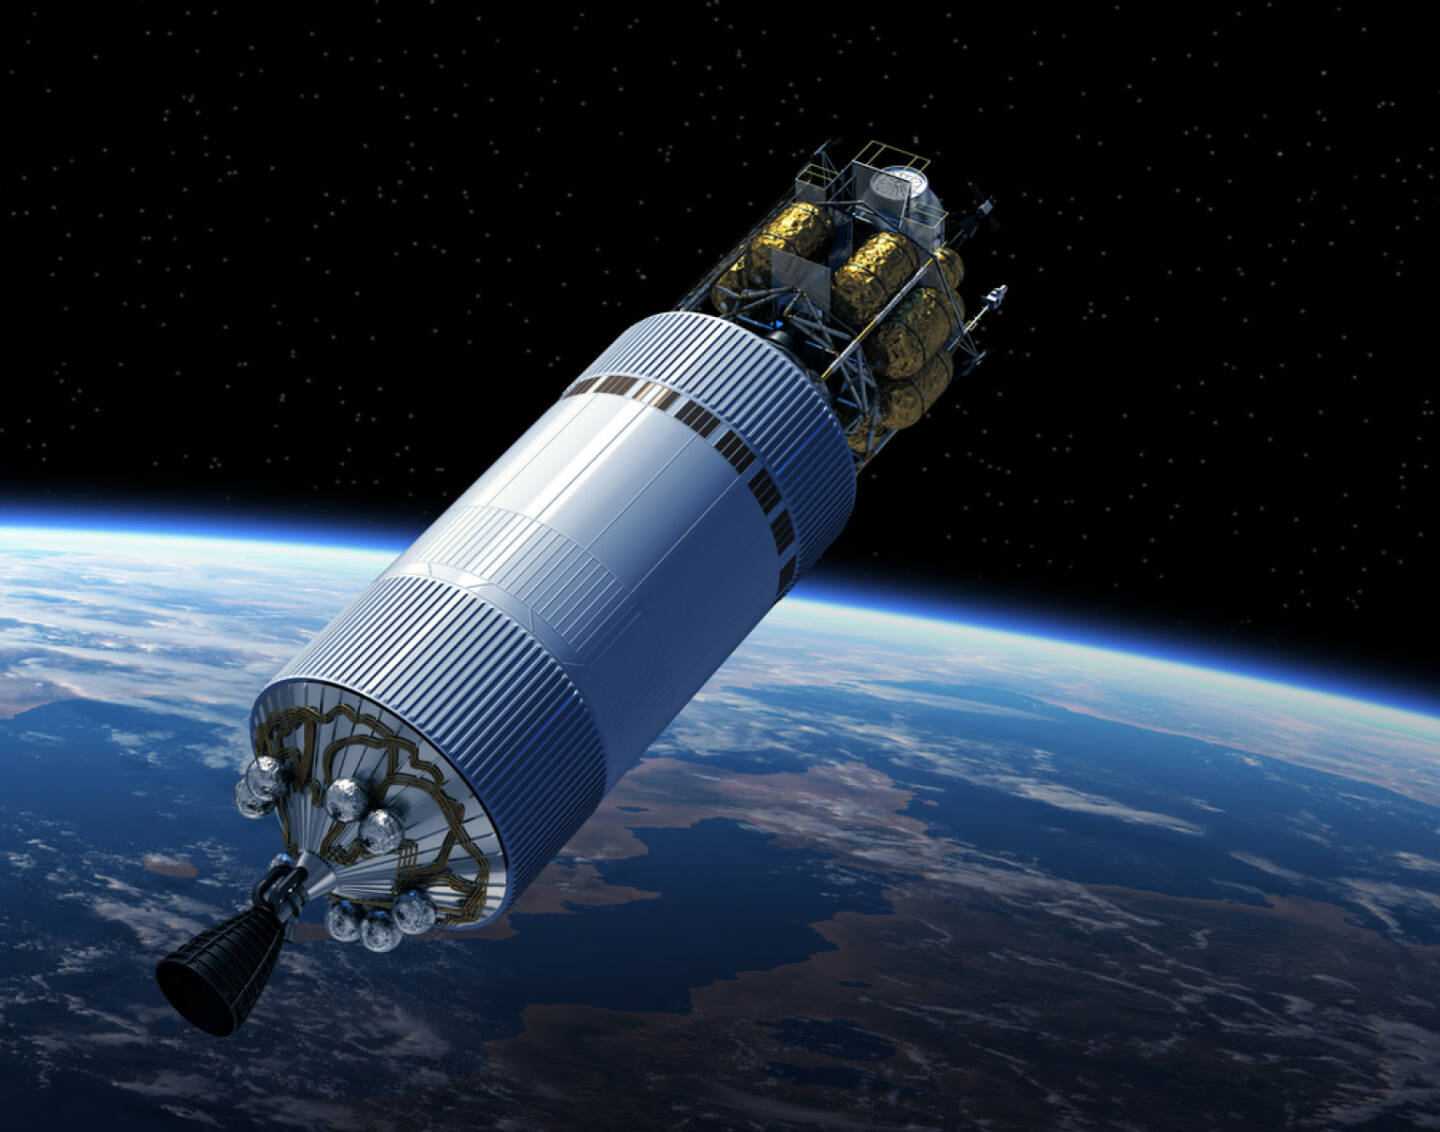 Innovation, Idee, neu, Satellit, Raumfahrt, Orbit, Weltall, Technik, Forschung, Daten, http://www.shutterstock.com/de/pic-242036014/stock-photo-crew-exploration-vehicle-in-space-d-scene-elements-of-this-image-furnished-by-nasa.html